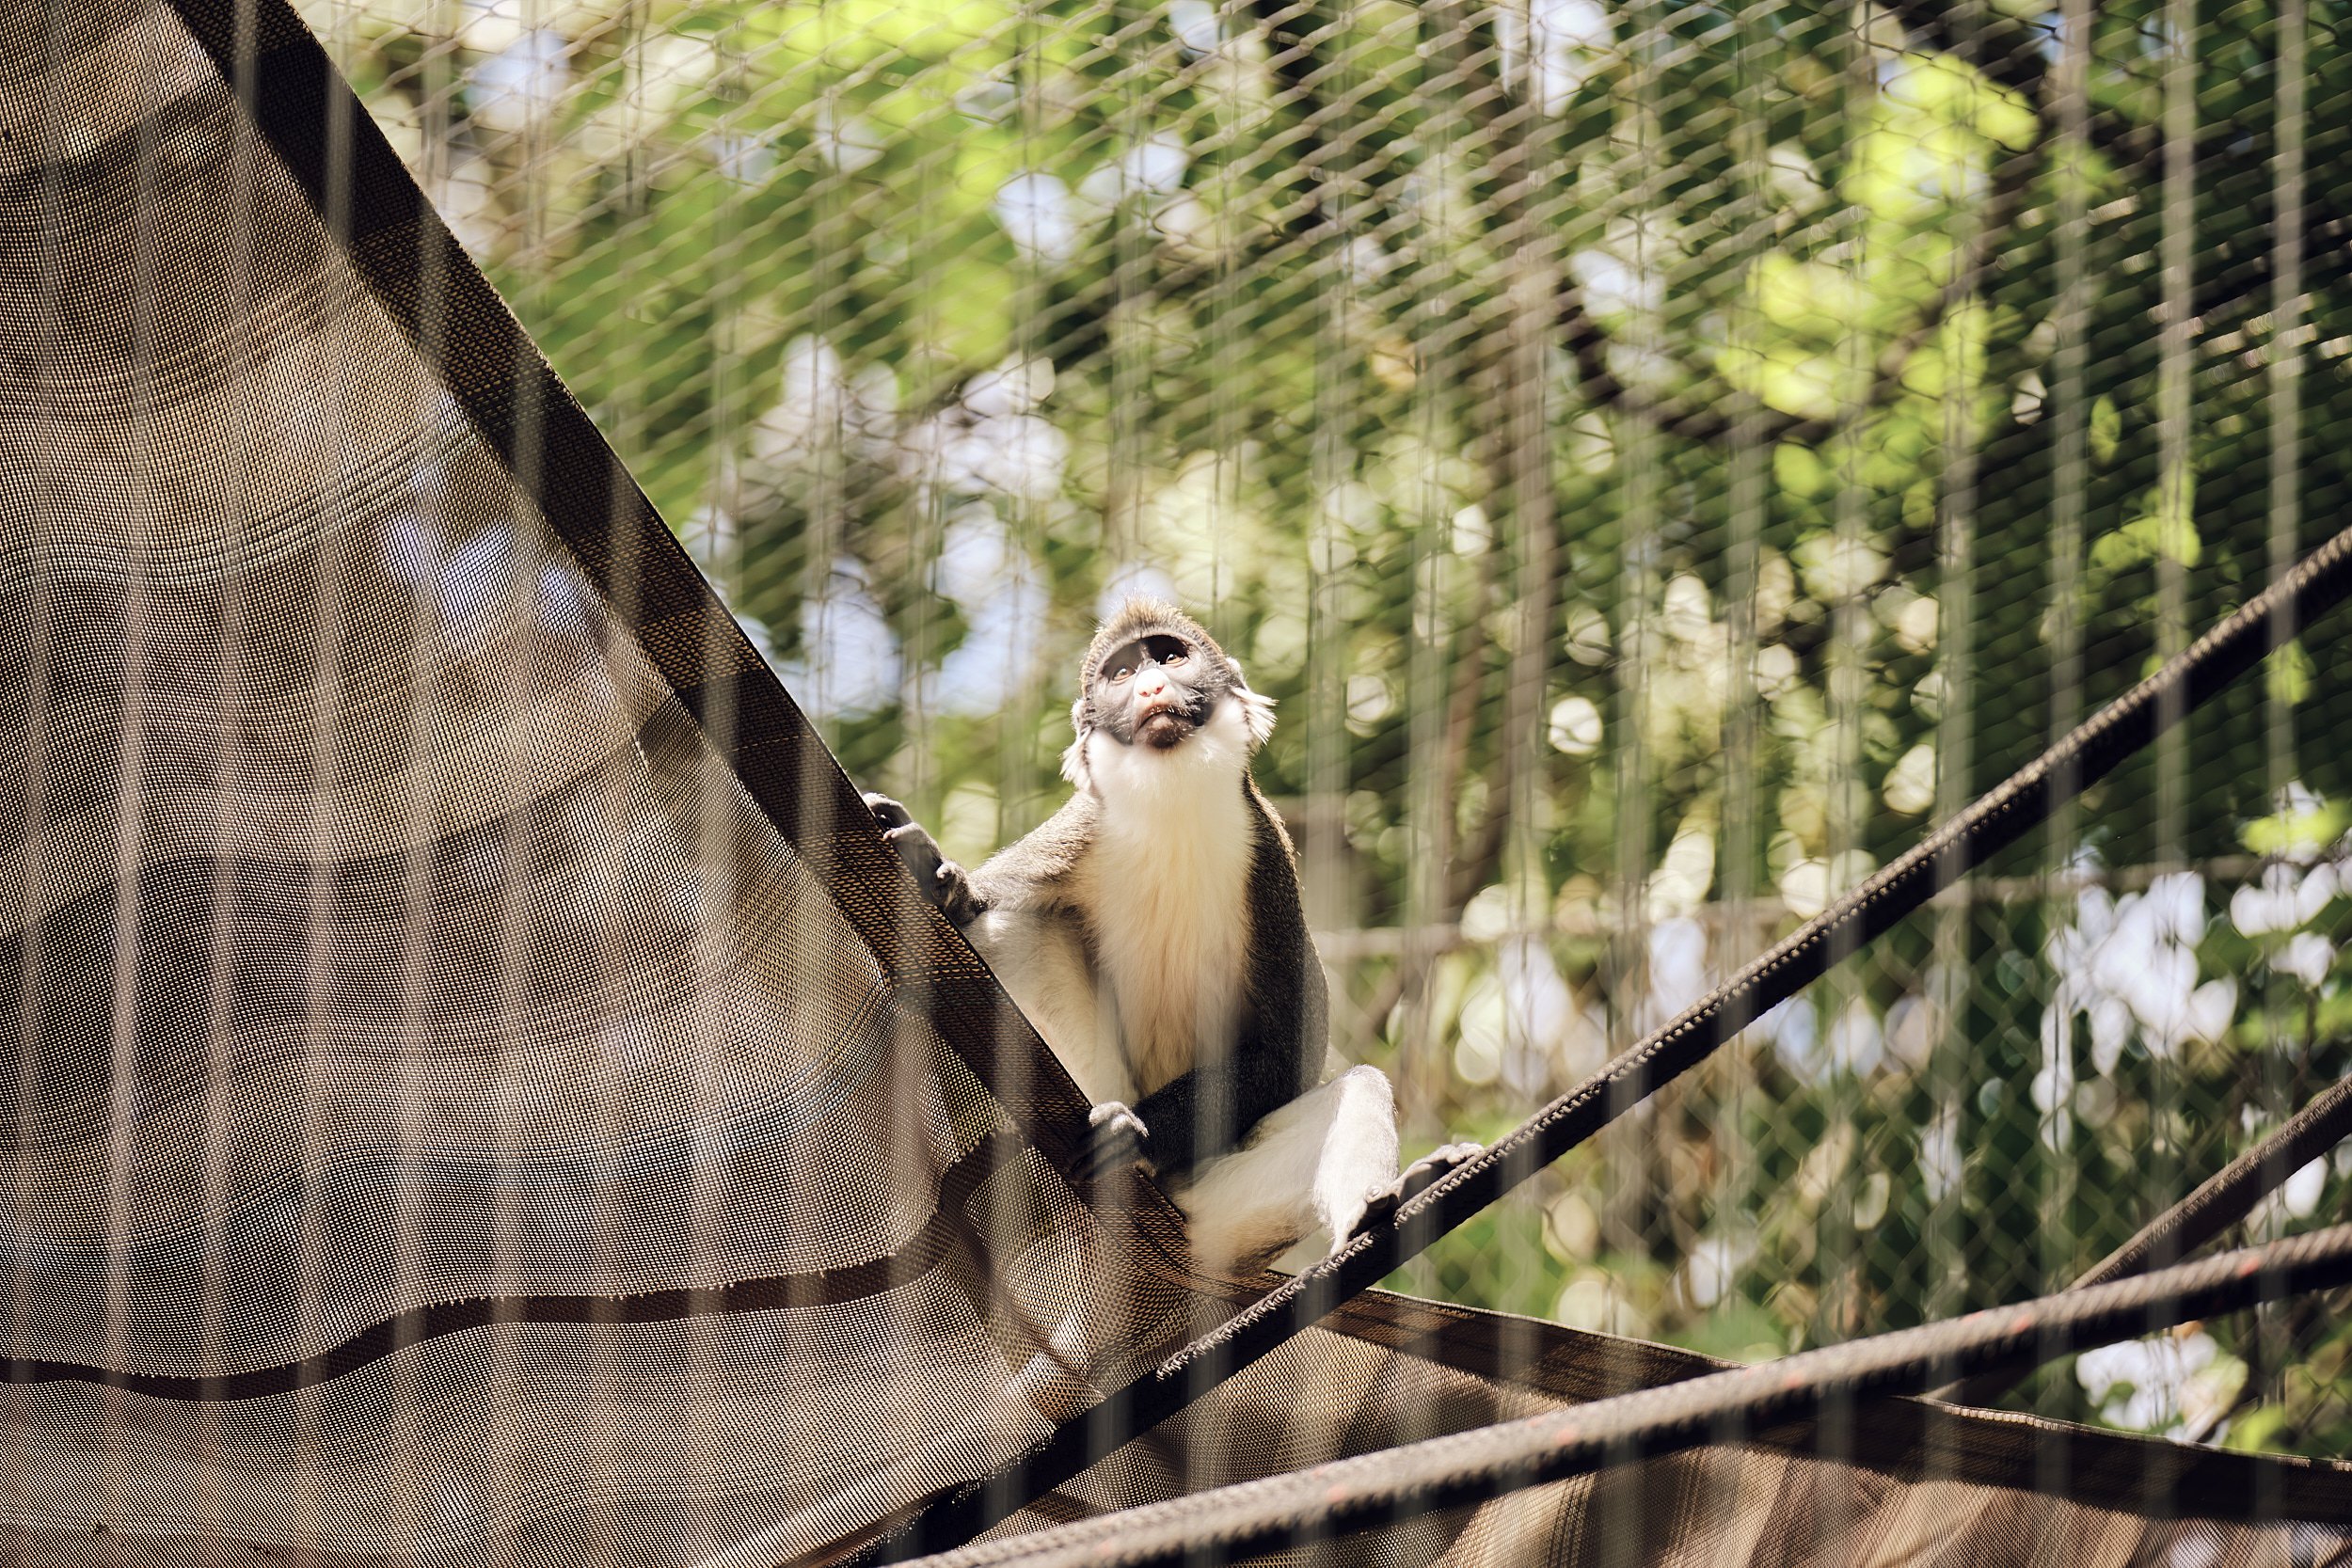 A color photo. A small monkey stands behind bars at a zoo, looking wistfully skyward.